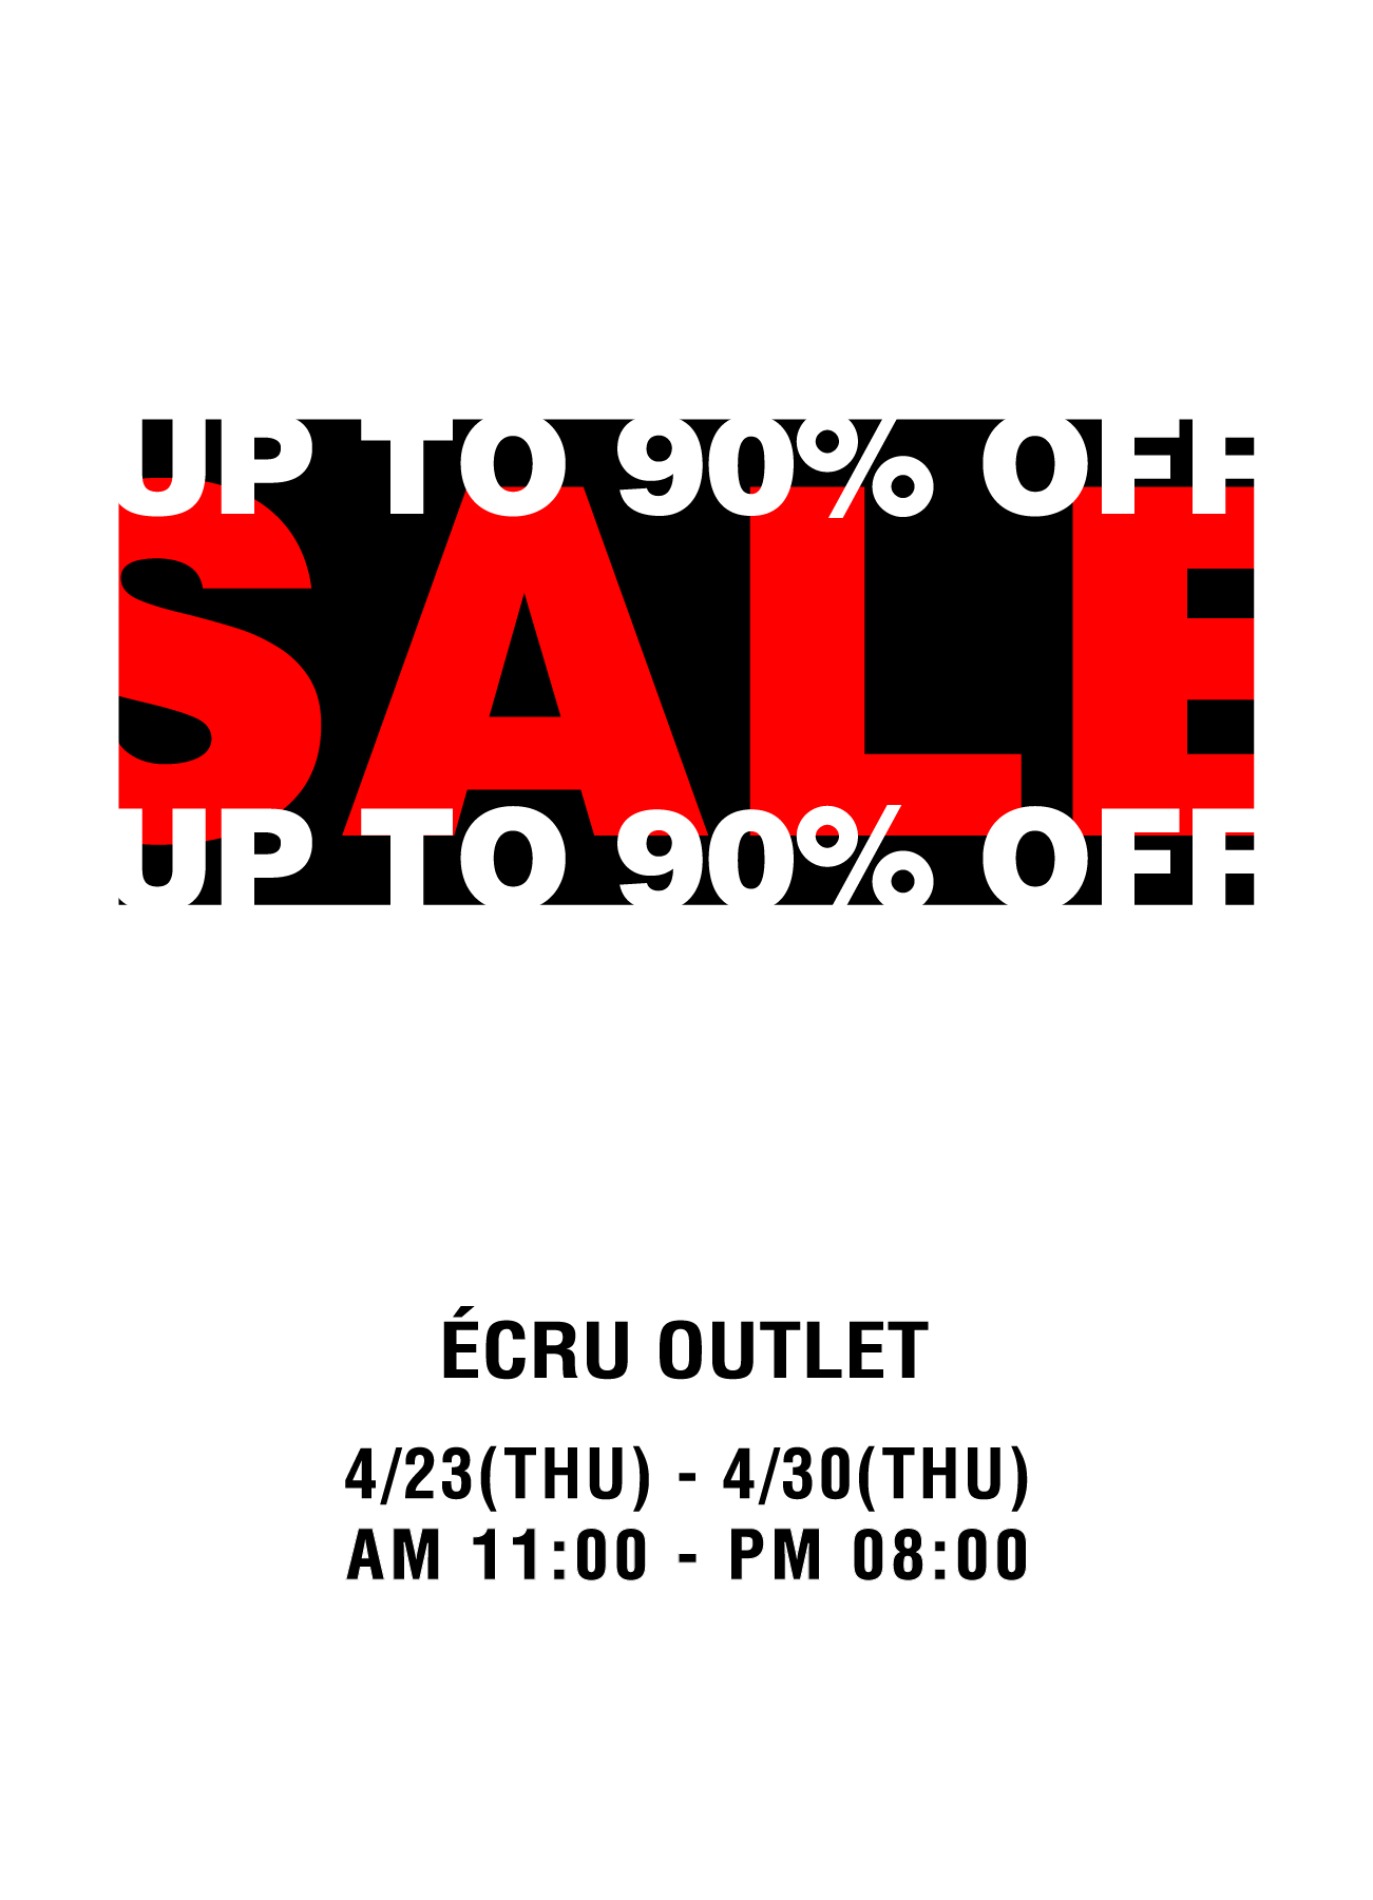 SALE UP TO 90% at ECRU Outlet